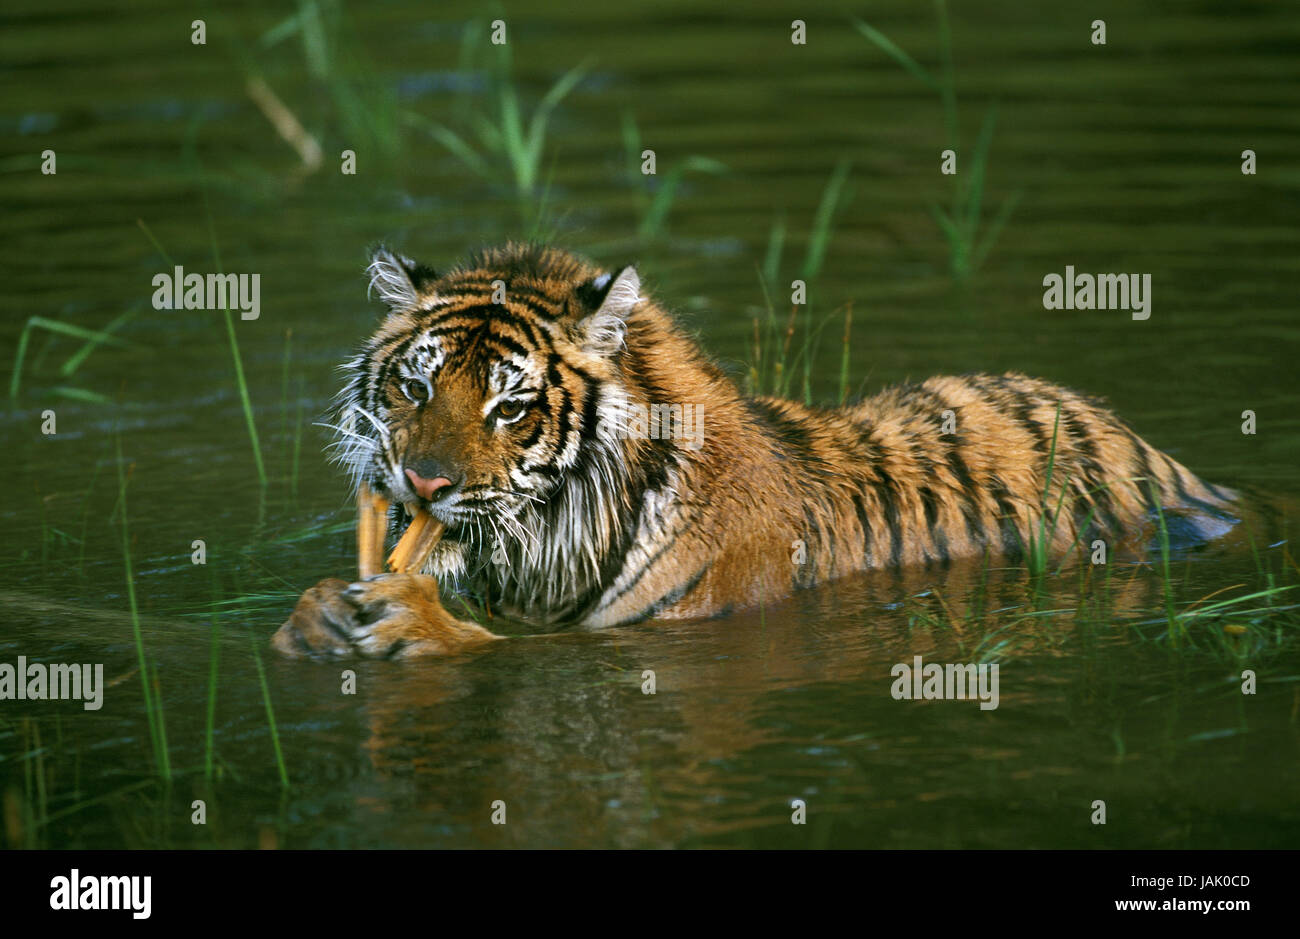 Siberian tiger,Panthera tigris altaica,in the water, Stock Photo